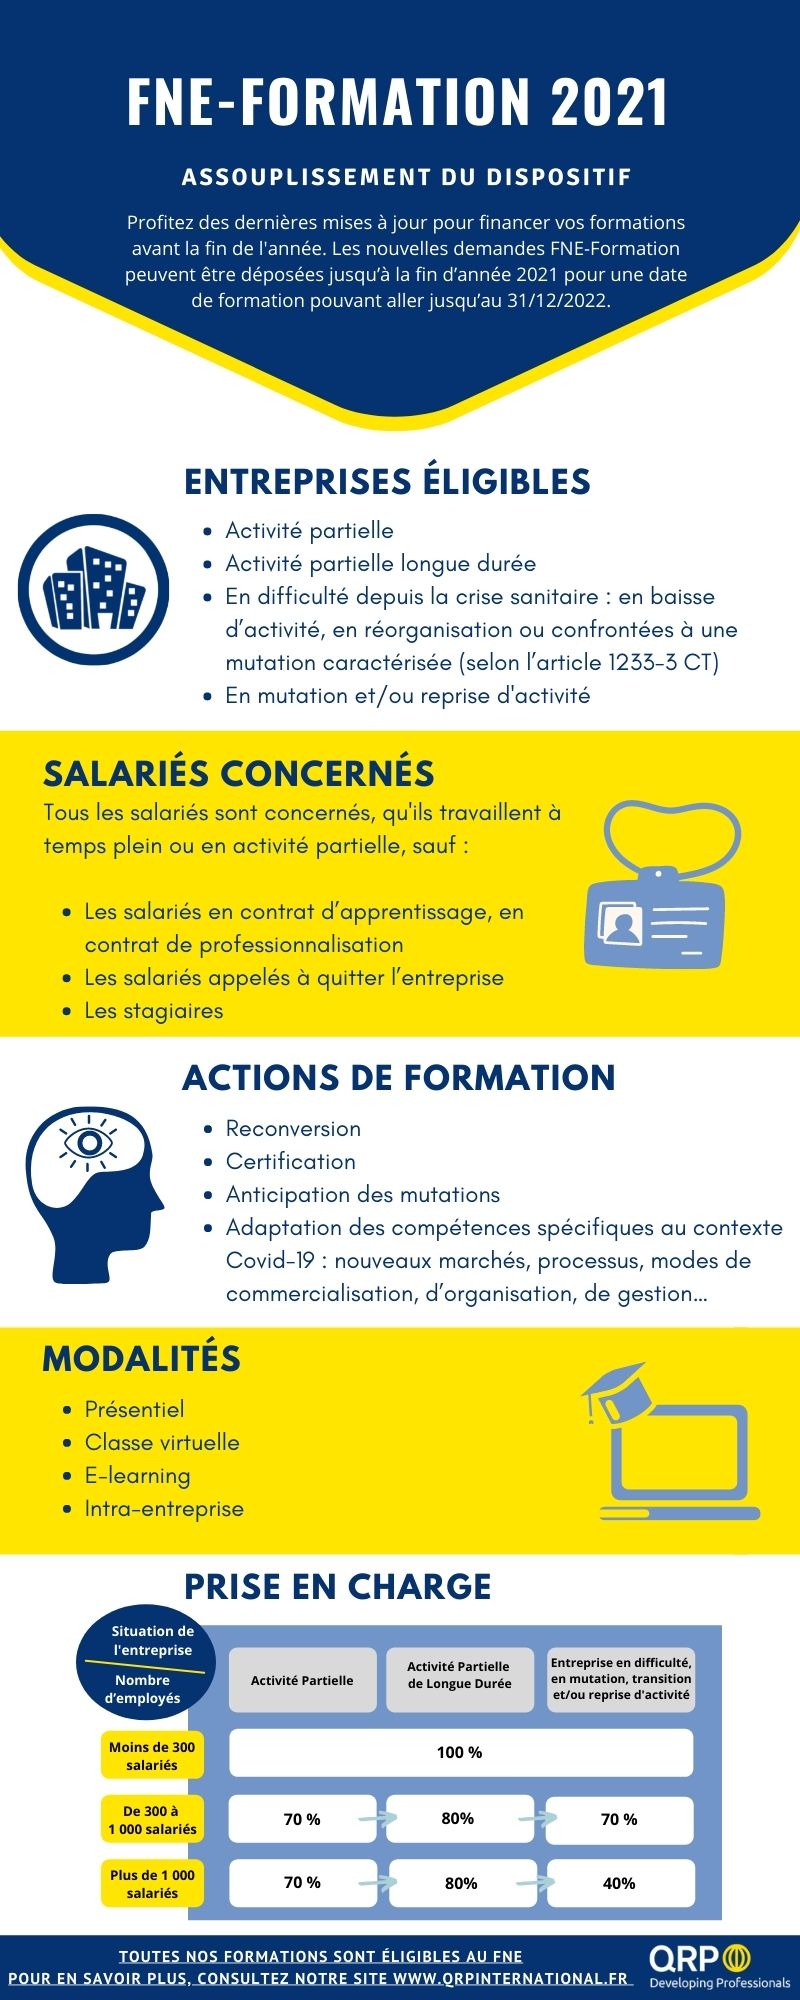 Infographie FNE-Formation 2021